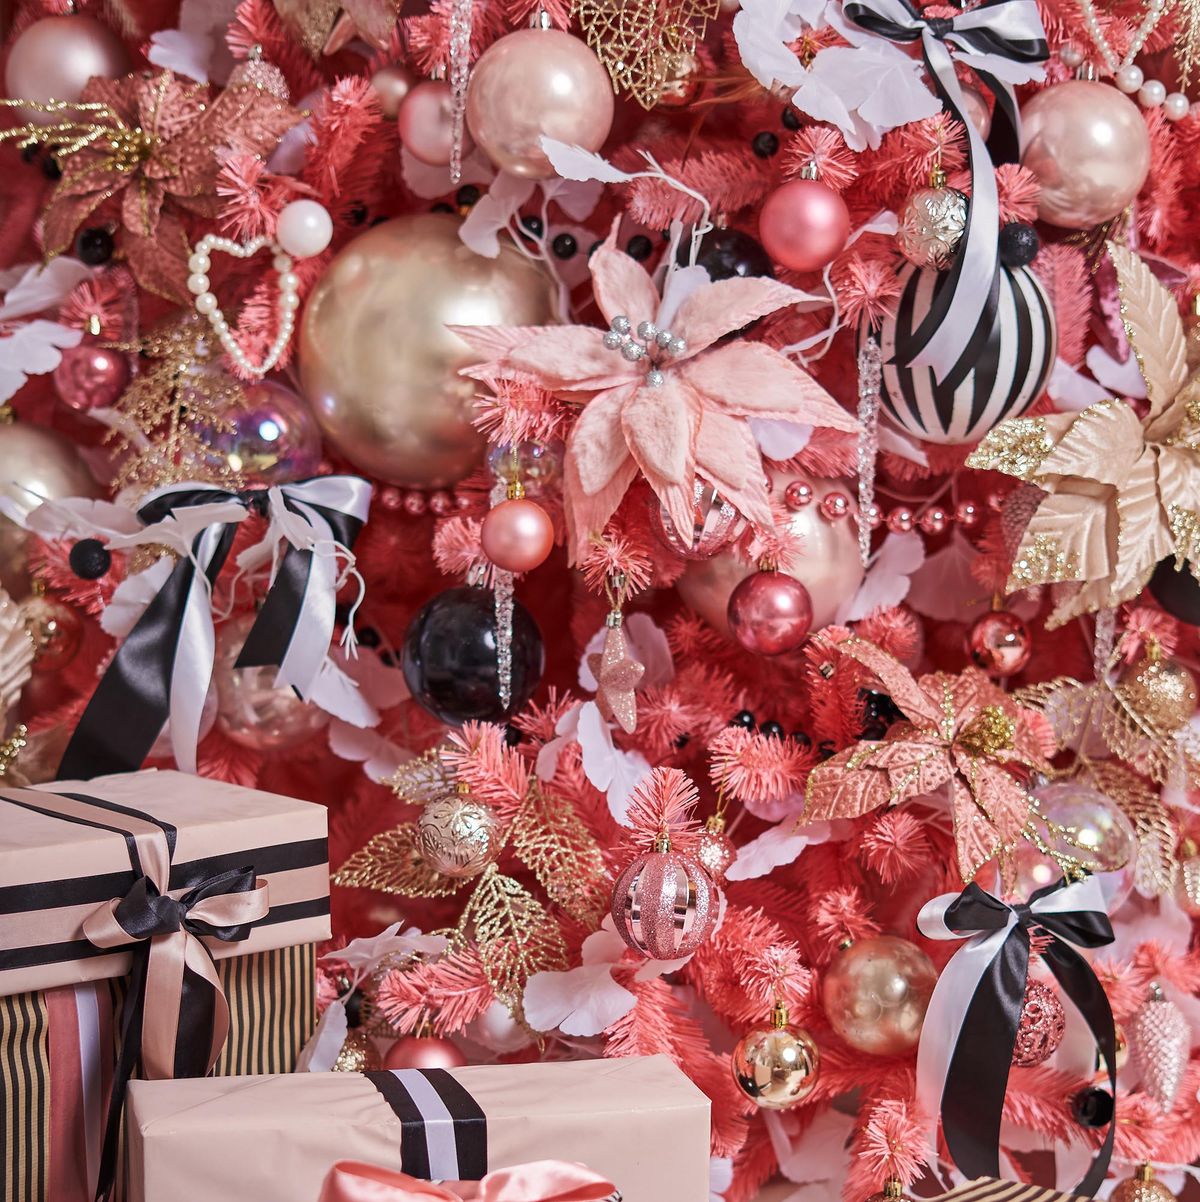 Pink and Gold Christmas Tree, US life and style